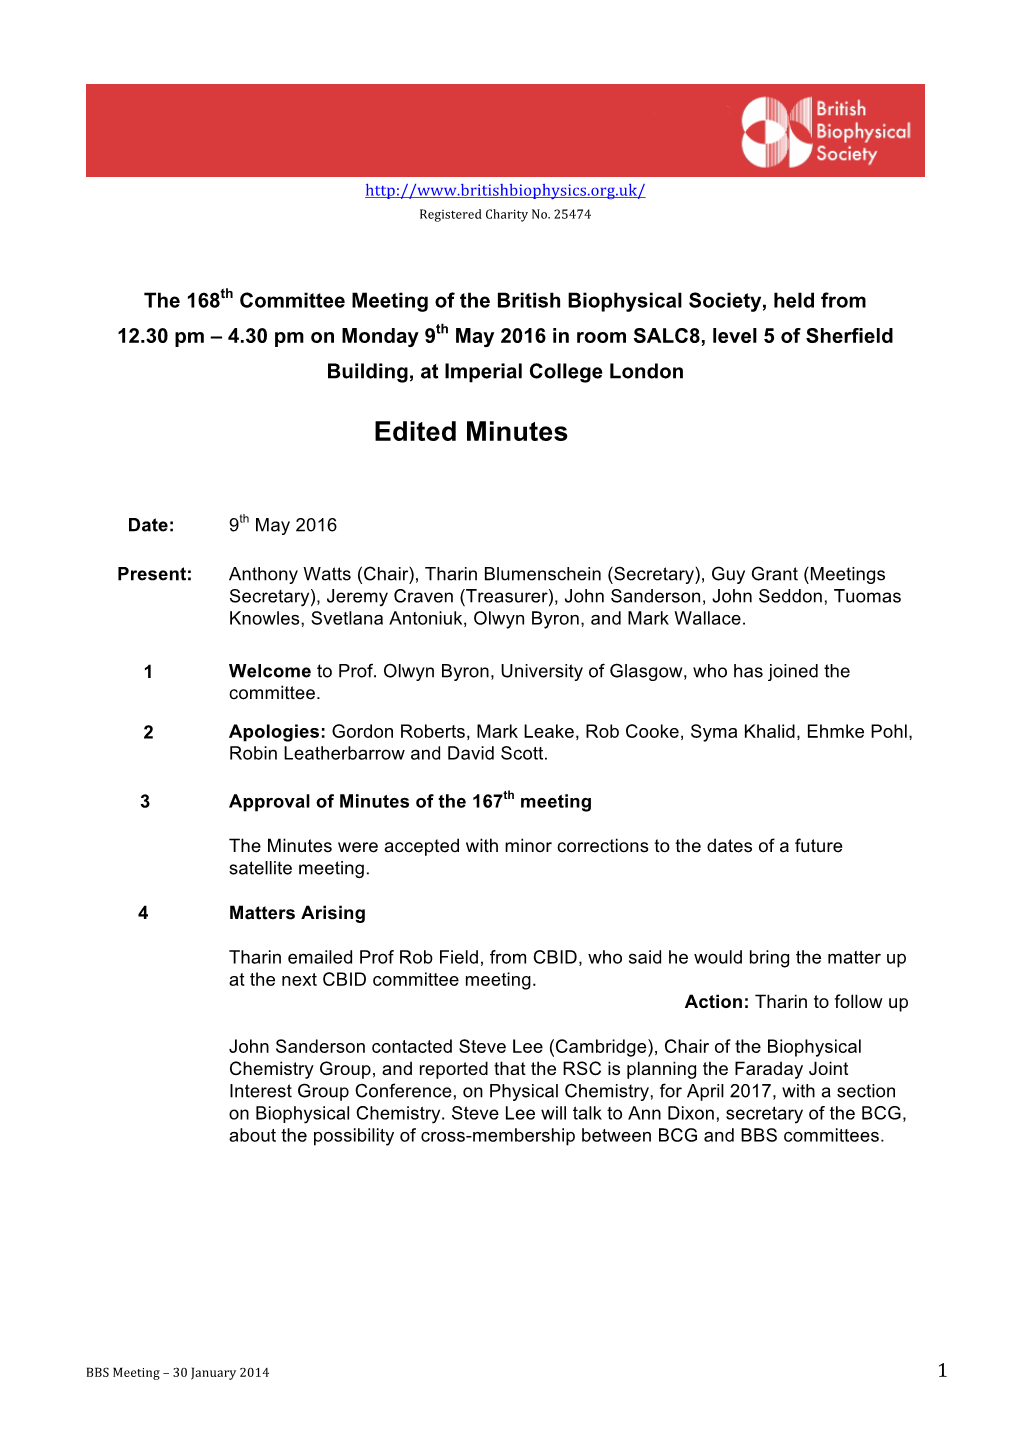 Edited Minutes of 168Th BBS Committee Meeting